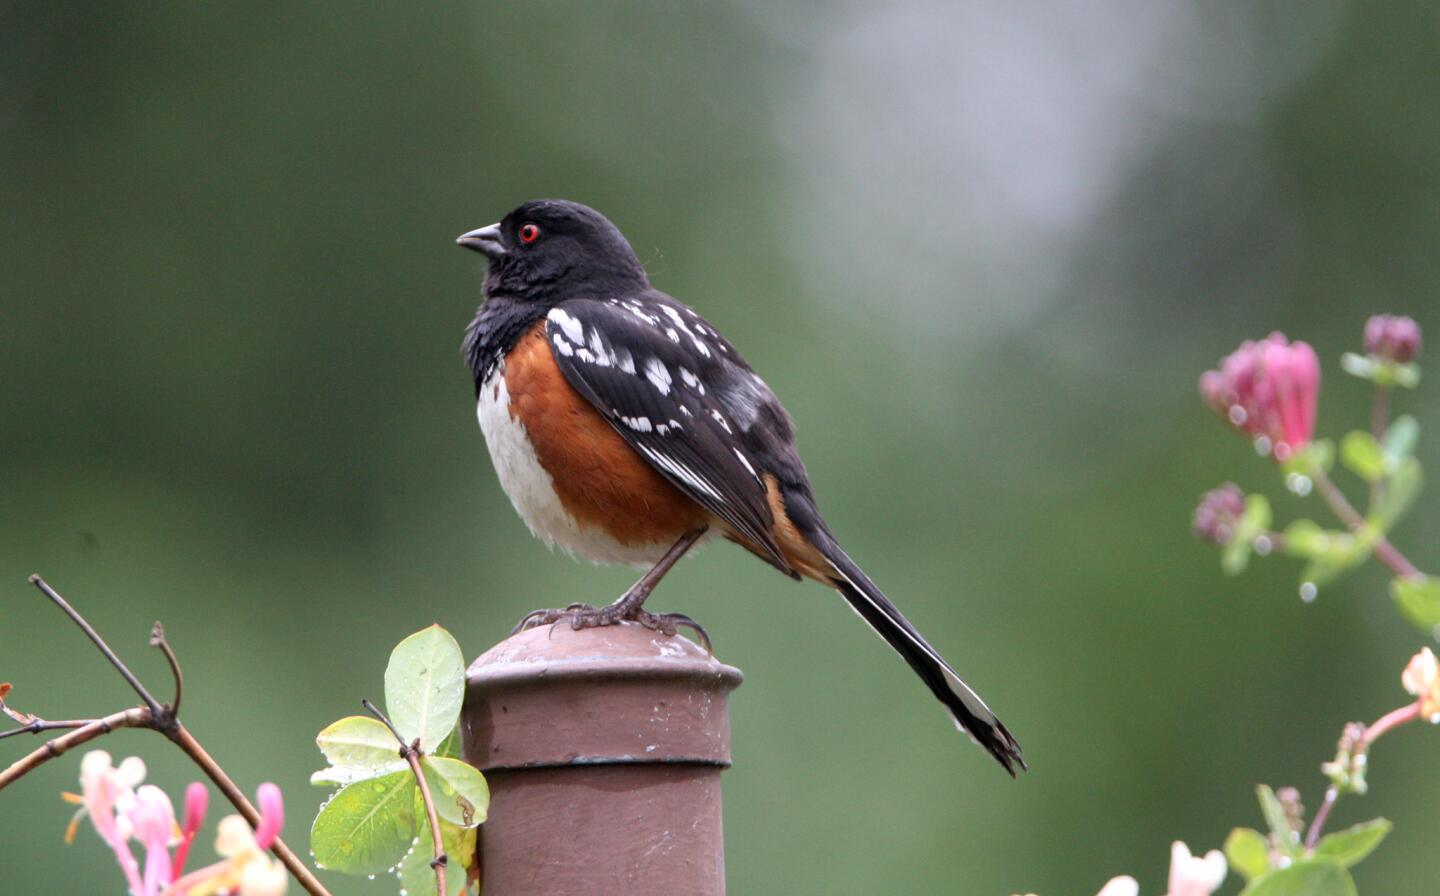 A friendly Spotted towhee was observed by attendees of the BirdLA birding walk at Descanso Gardens in La Cañada Flintridge on Saturday, May 7, 2016. Local birding expert Hill Penfold led the walk through the gardens.